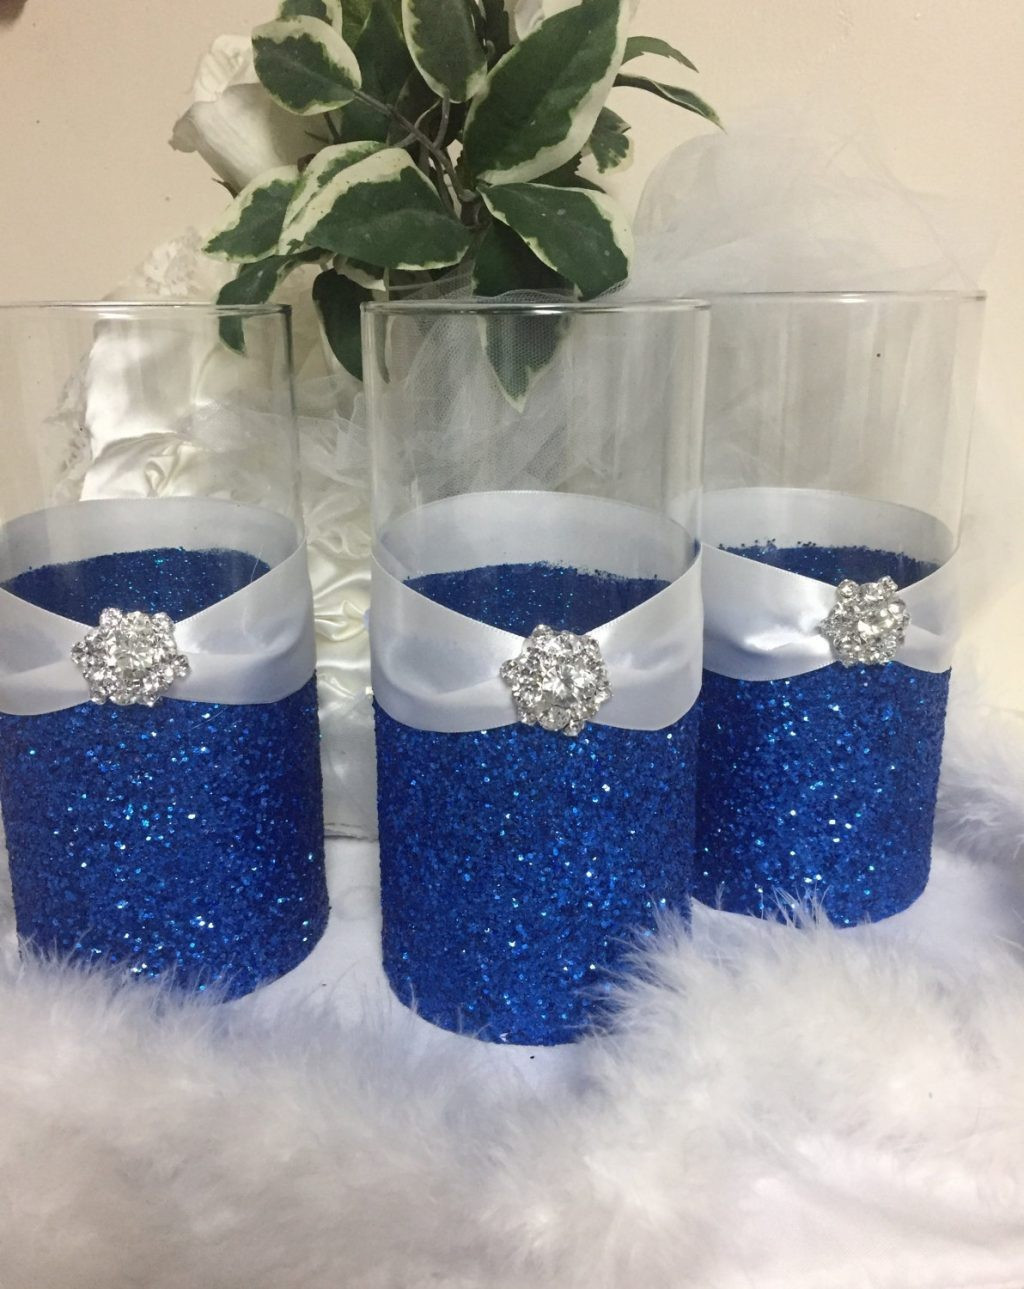 large cylinder vases wholesale of wedding decorations centerpieces beautiful tallh vases glitter vase regarding wedding decorations centerpieces beautiful tallh vases glitter vase centerpiece diy vasei 0d ball for design